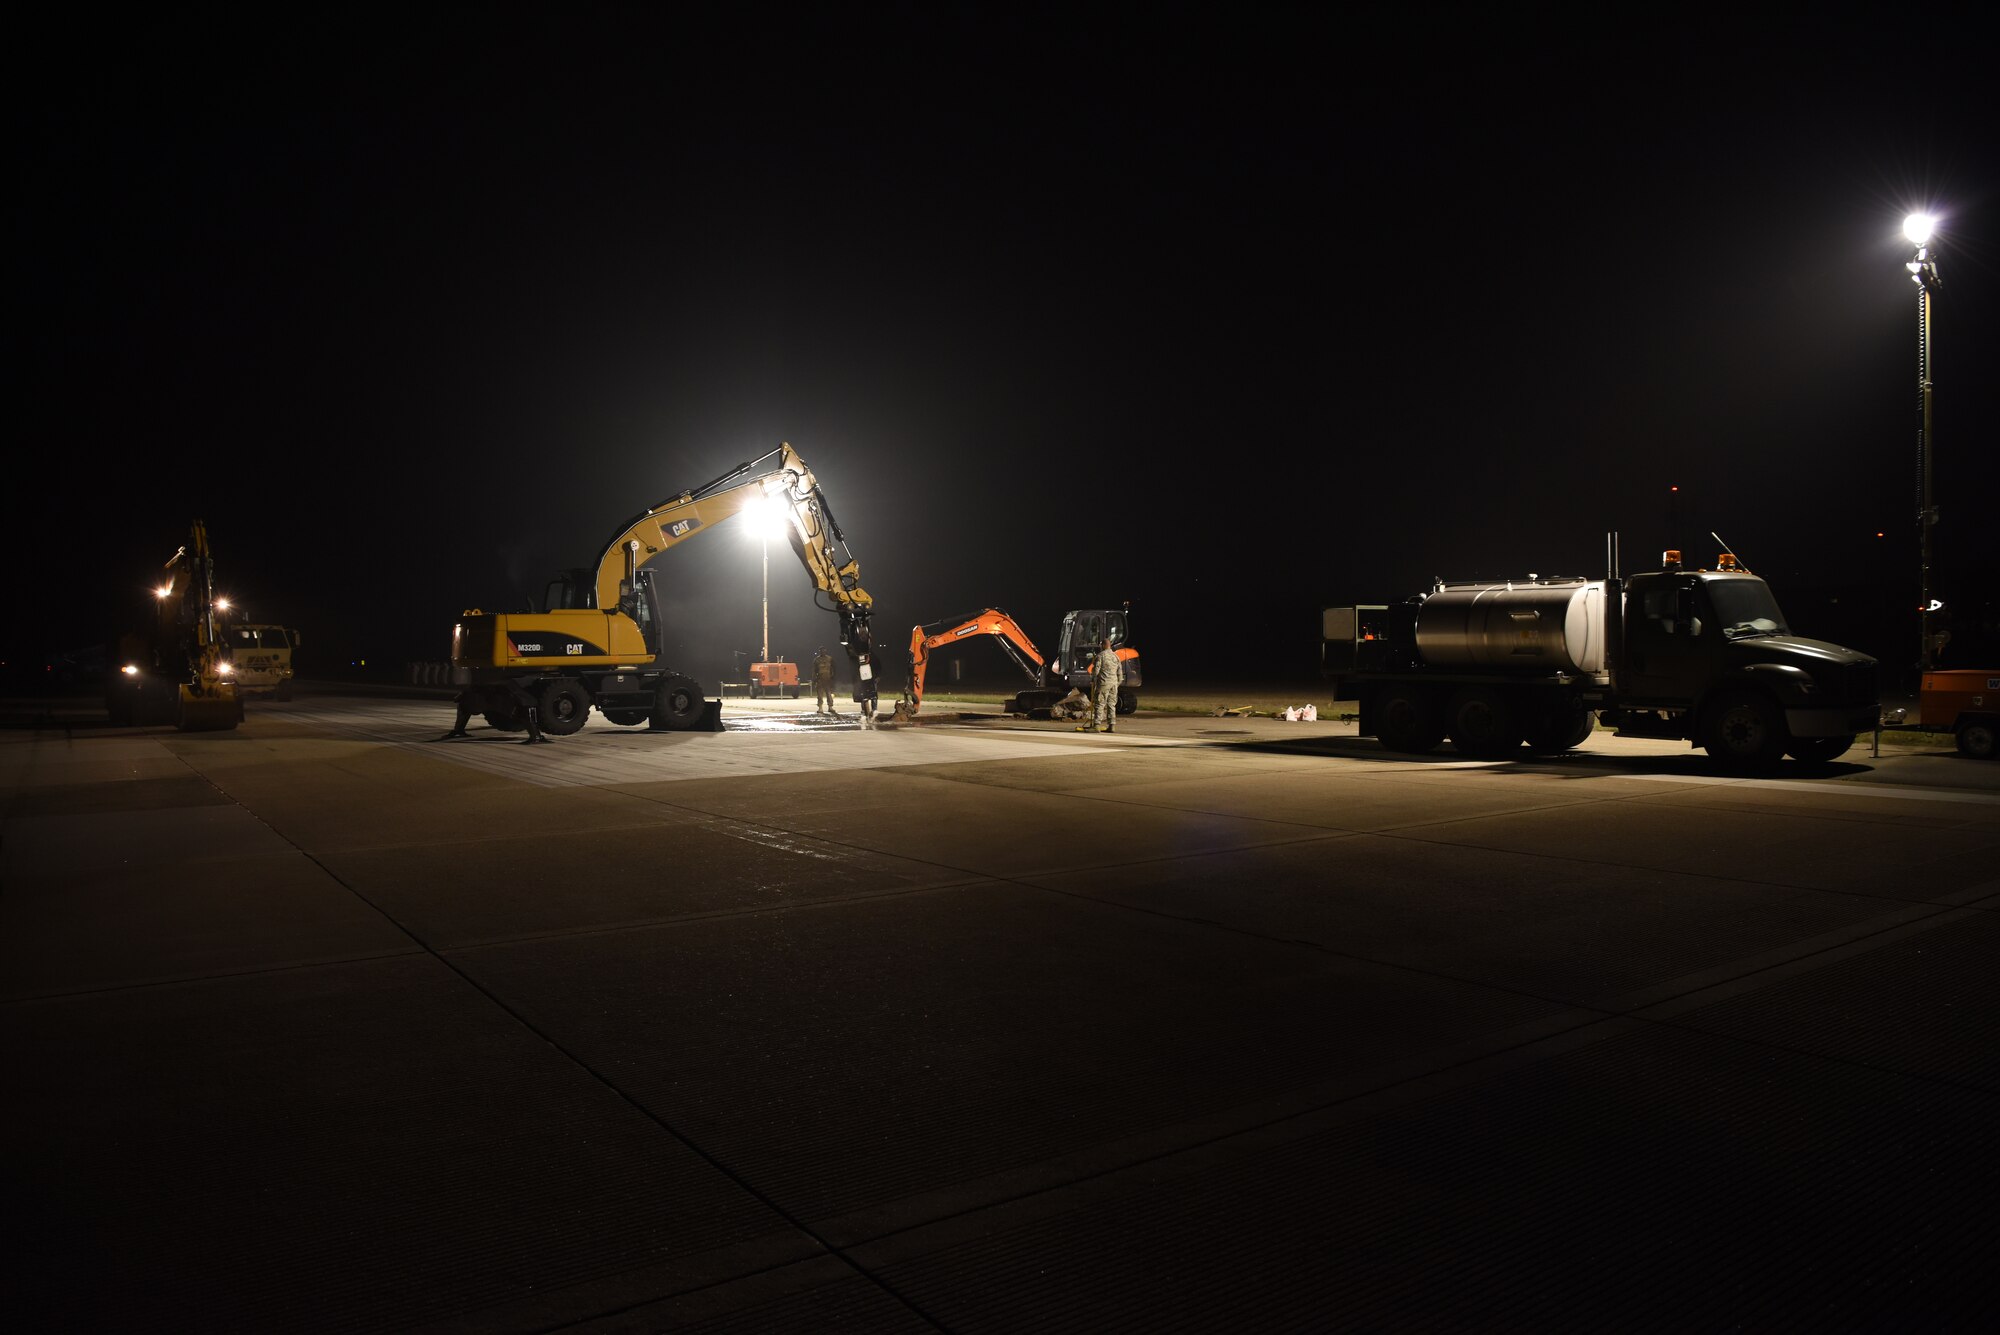 U.S. Air Force 8th Civil Engineer Squadron members work to repair a rupture at Kunsan Air Base, Republic of Korea, May 1, 2019. 8th CES and 8th Logistics Readiness Squadron members responded to incident and made the flight line operational again within 24 hours. (U.S. Air Force photo by Staff Sgt. Joshua Edwards)